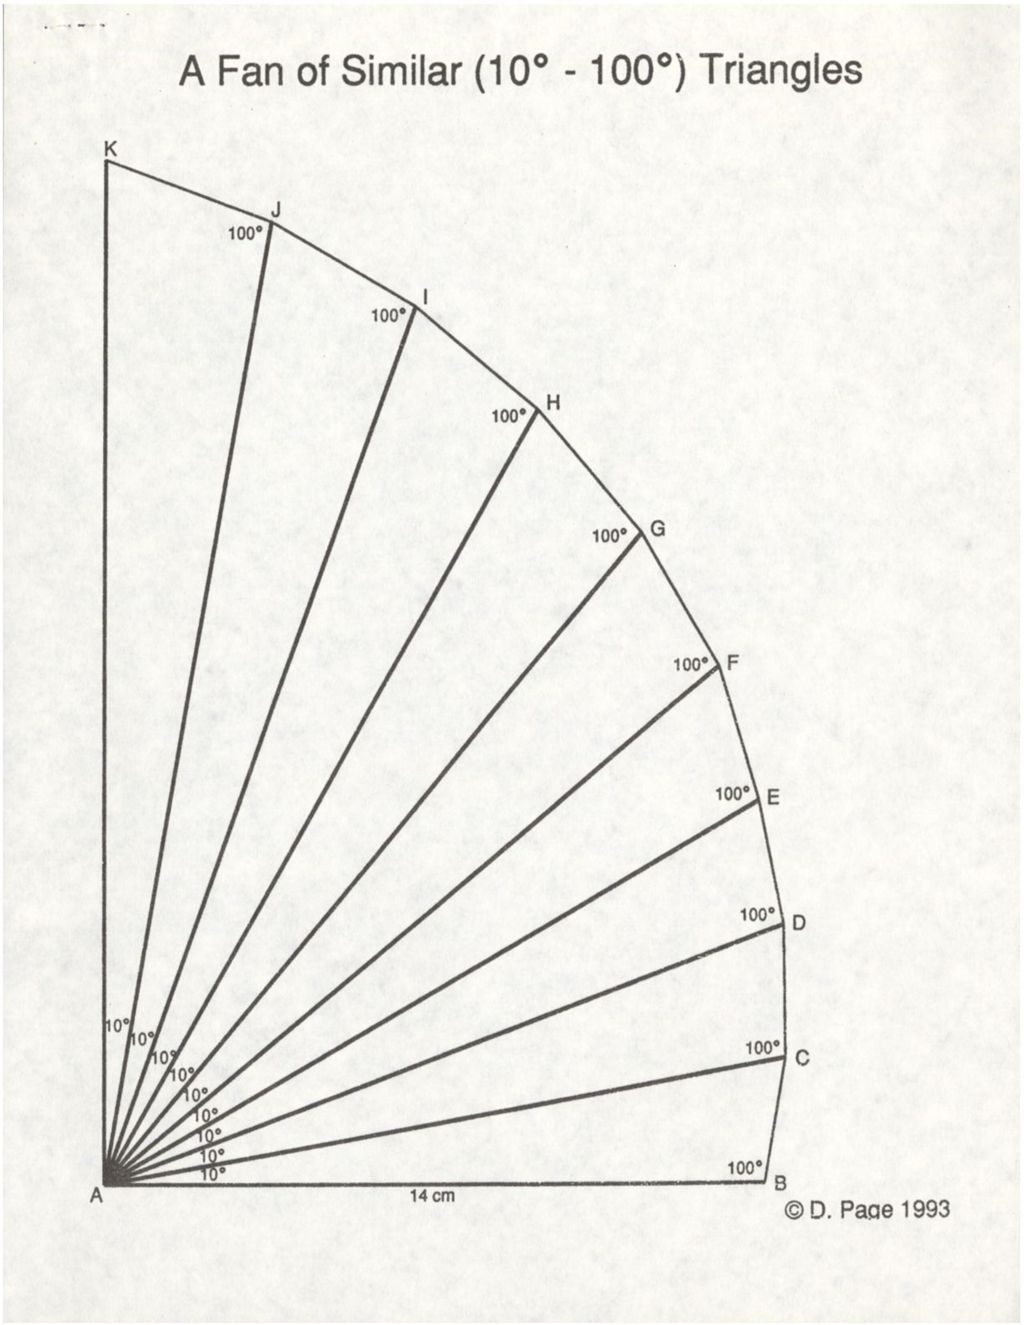 Miniature of A Fan of Similar (10 degree – 100 degree) Triangles (image and instructions)